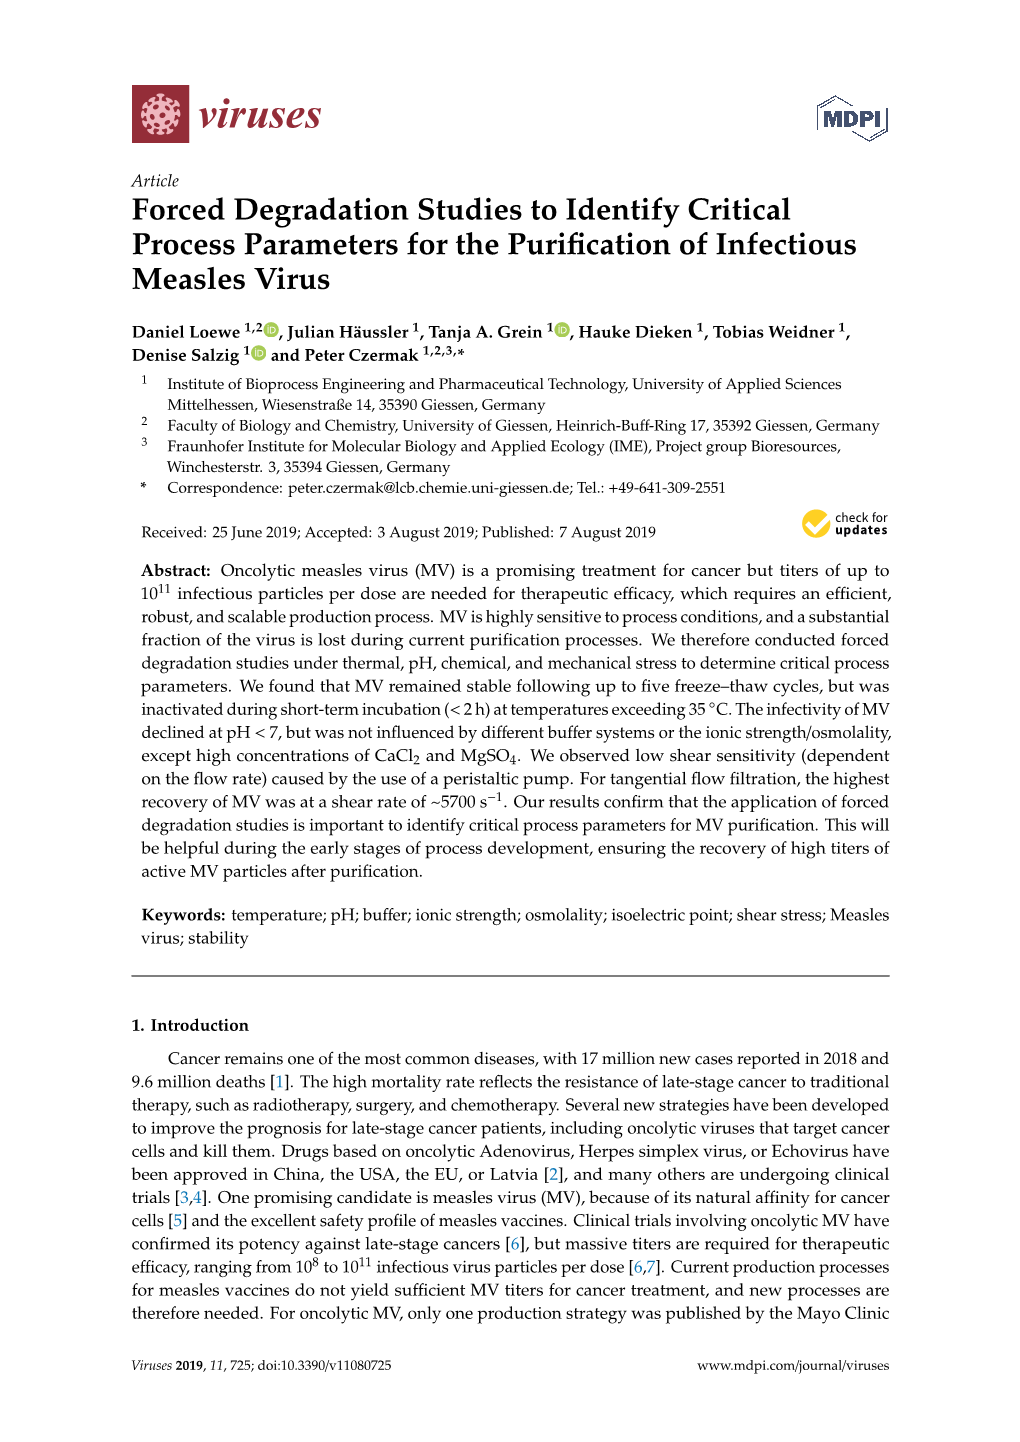 Forced Degradation Studies to Identify Critical Process Parameters for the Puriﬁcation of Infectious Measles Virus